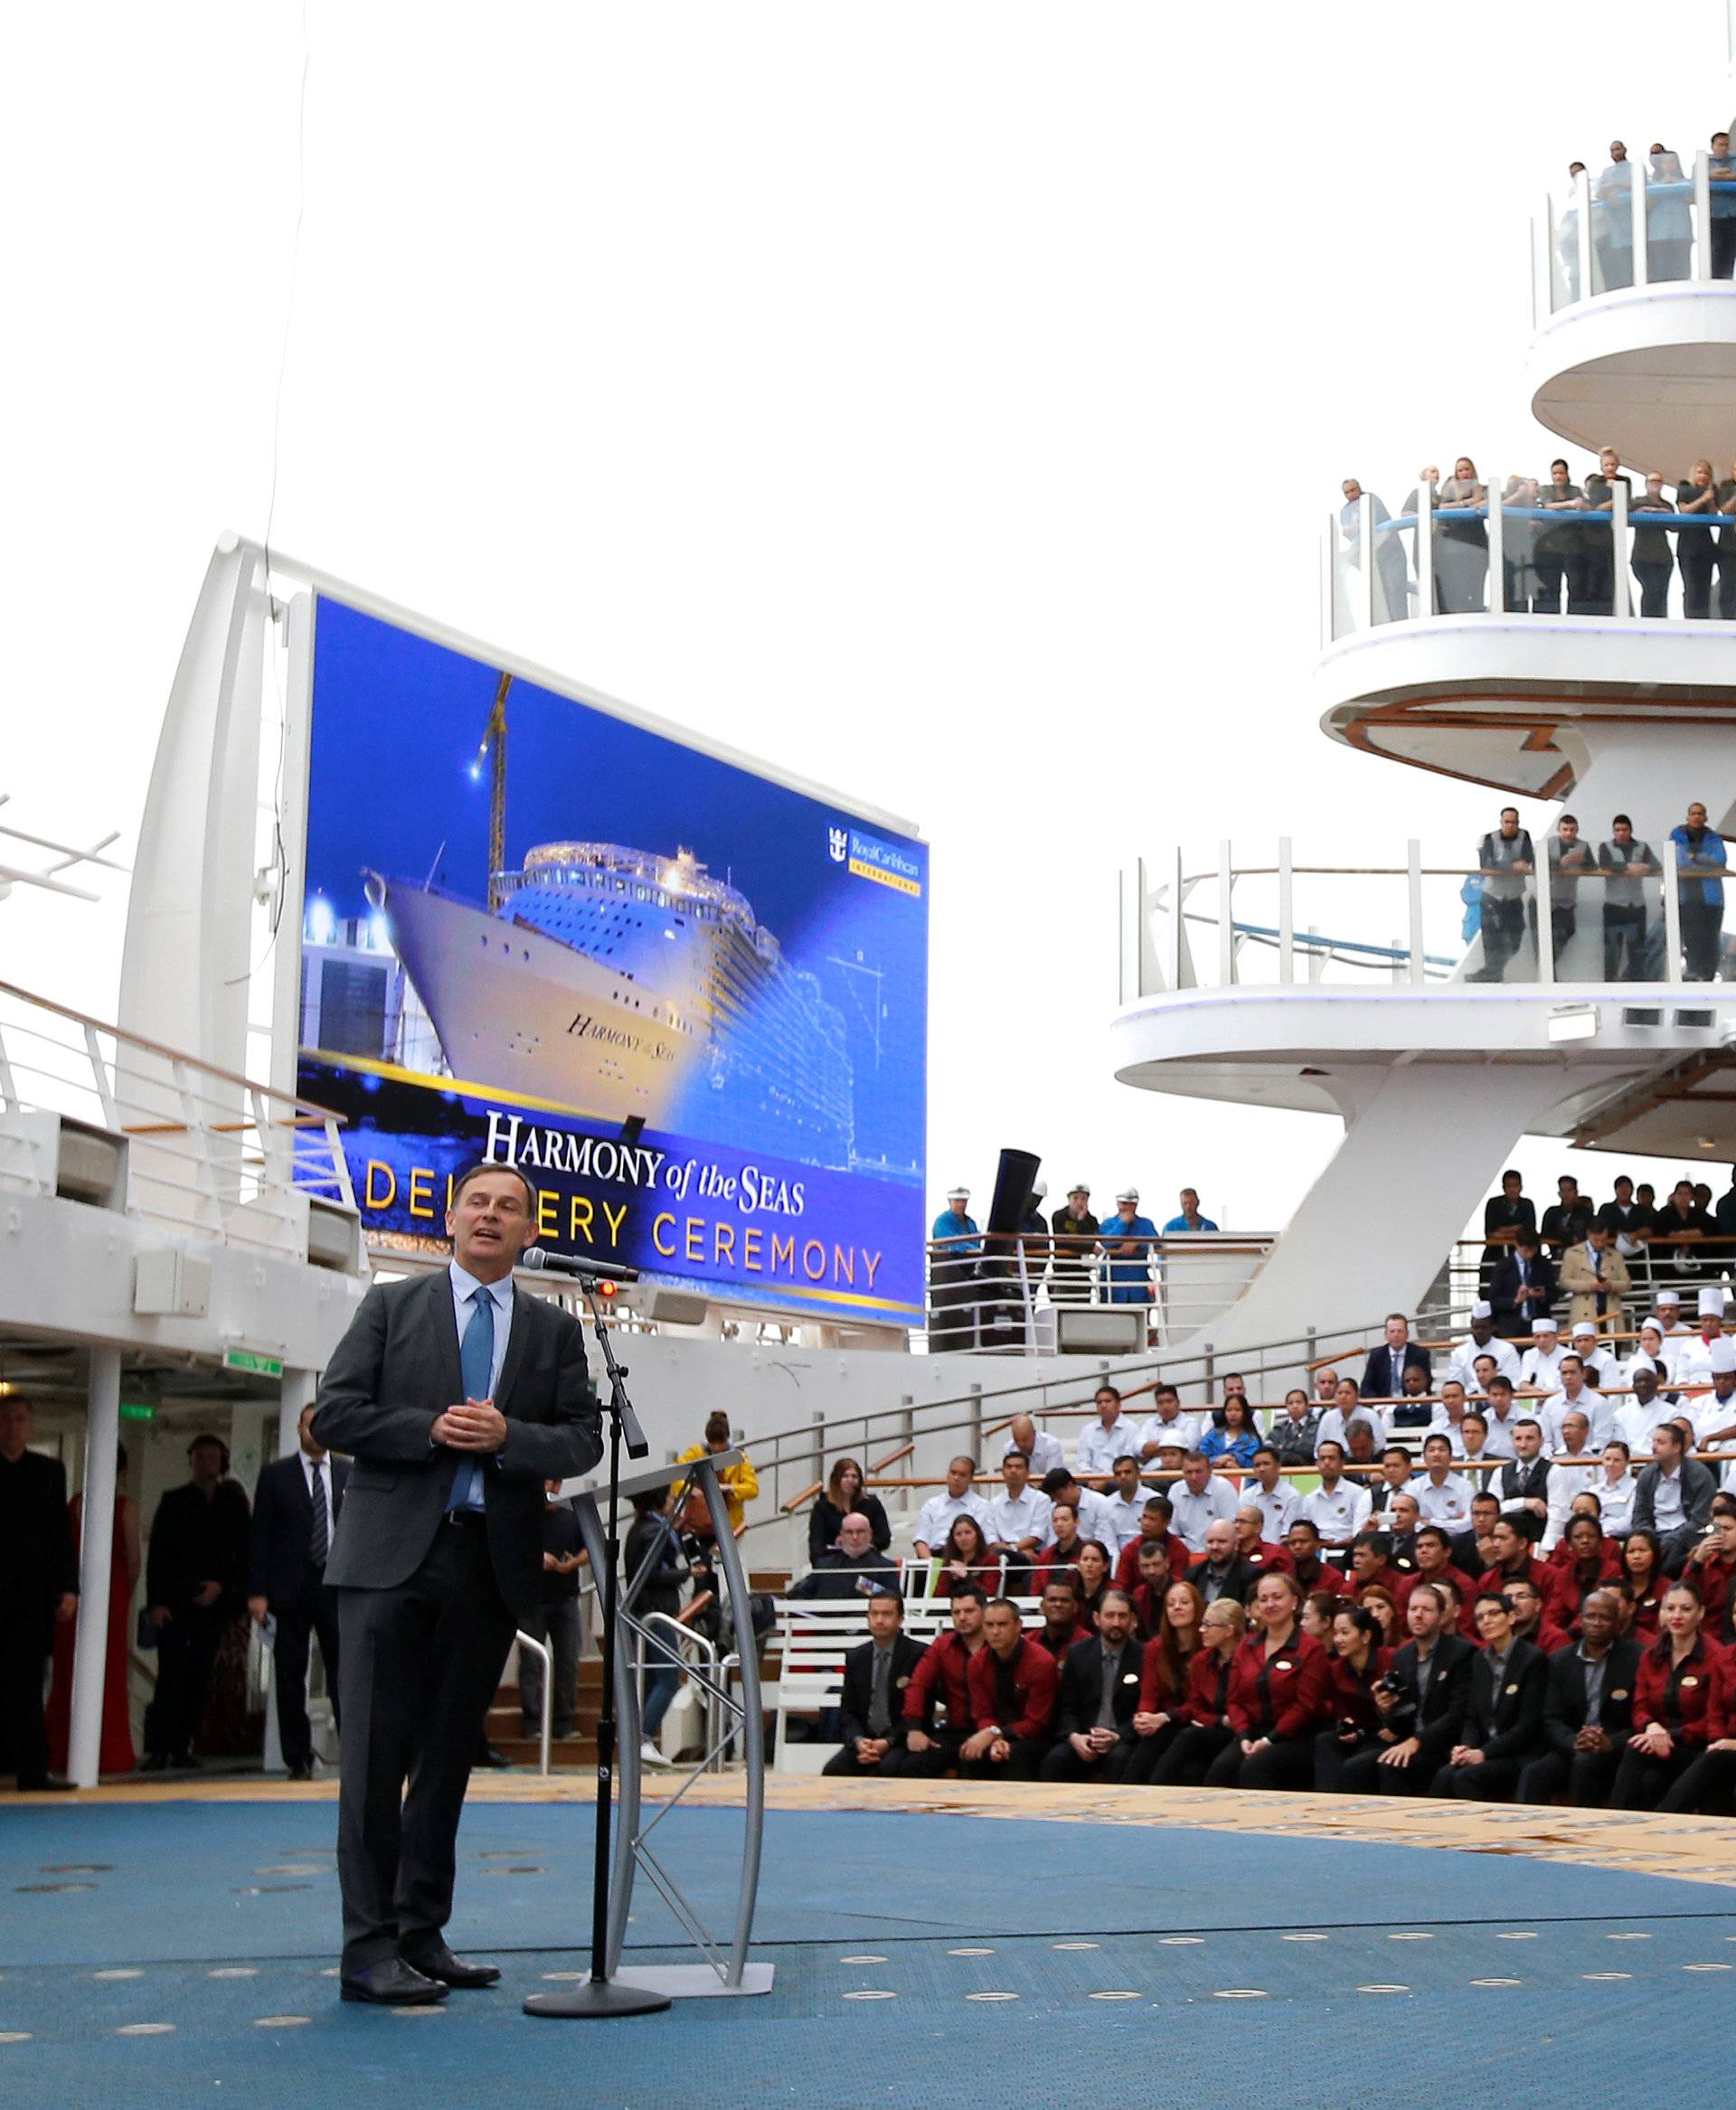 Laurent Castaing, President of STX France attends the delivery ceremony of the Harmony of the Seas (Oasis 3) class ship at the STX Les Chantiers de l'Atlantique shipyard site in Saint-Nazaire